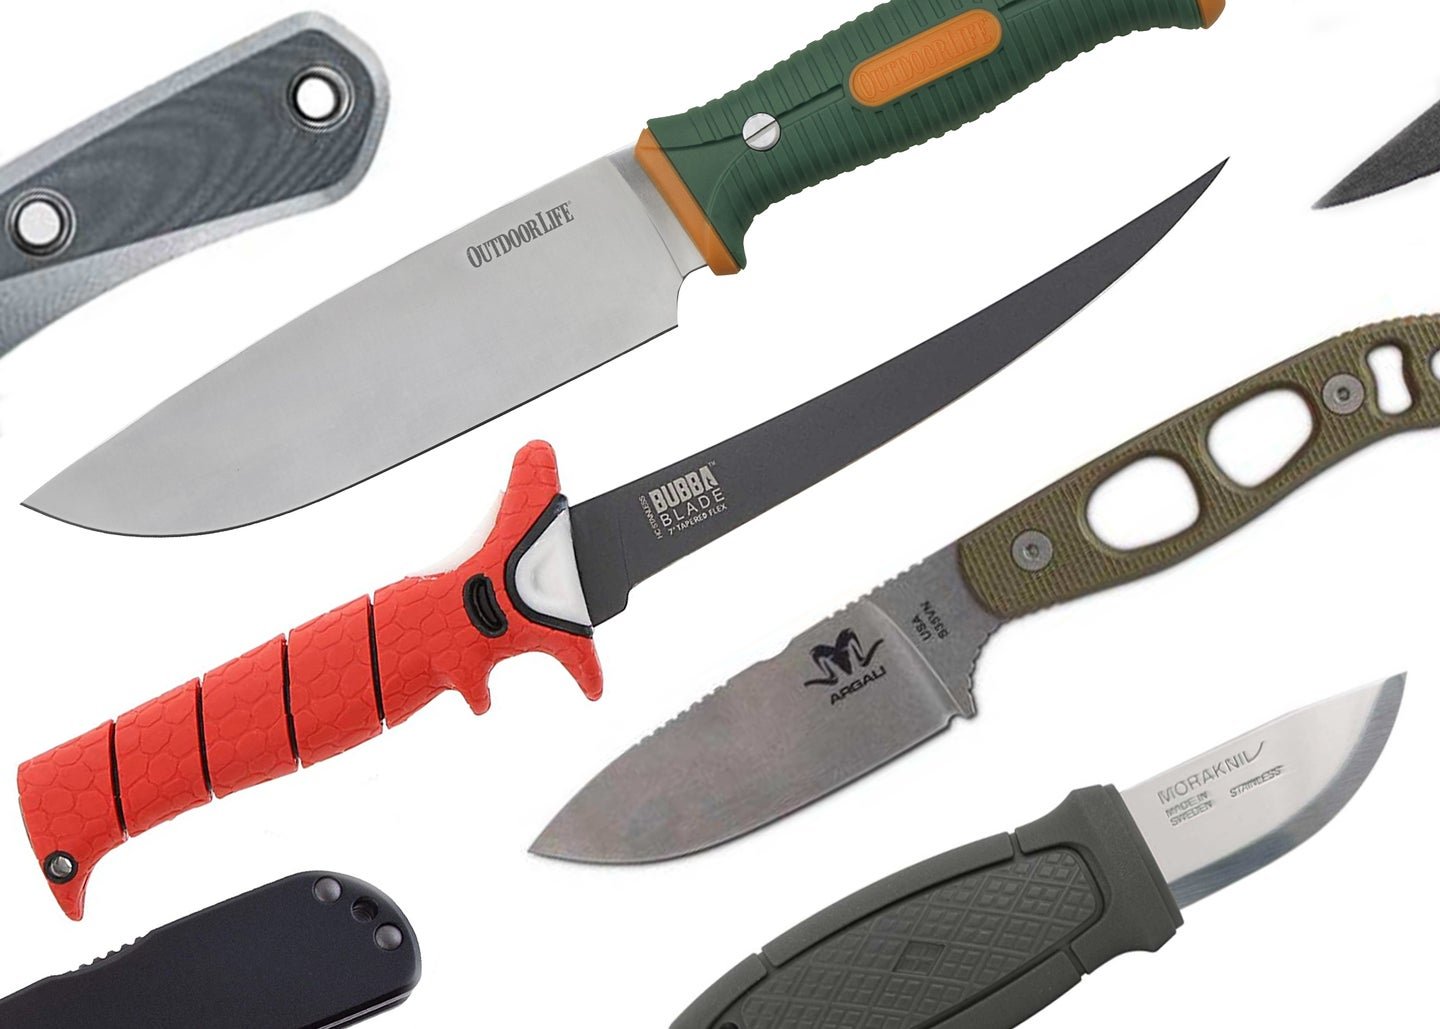 The Best New Knives of 2022